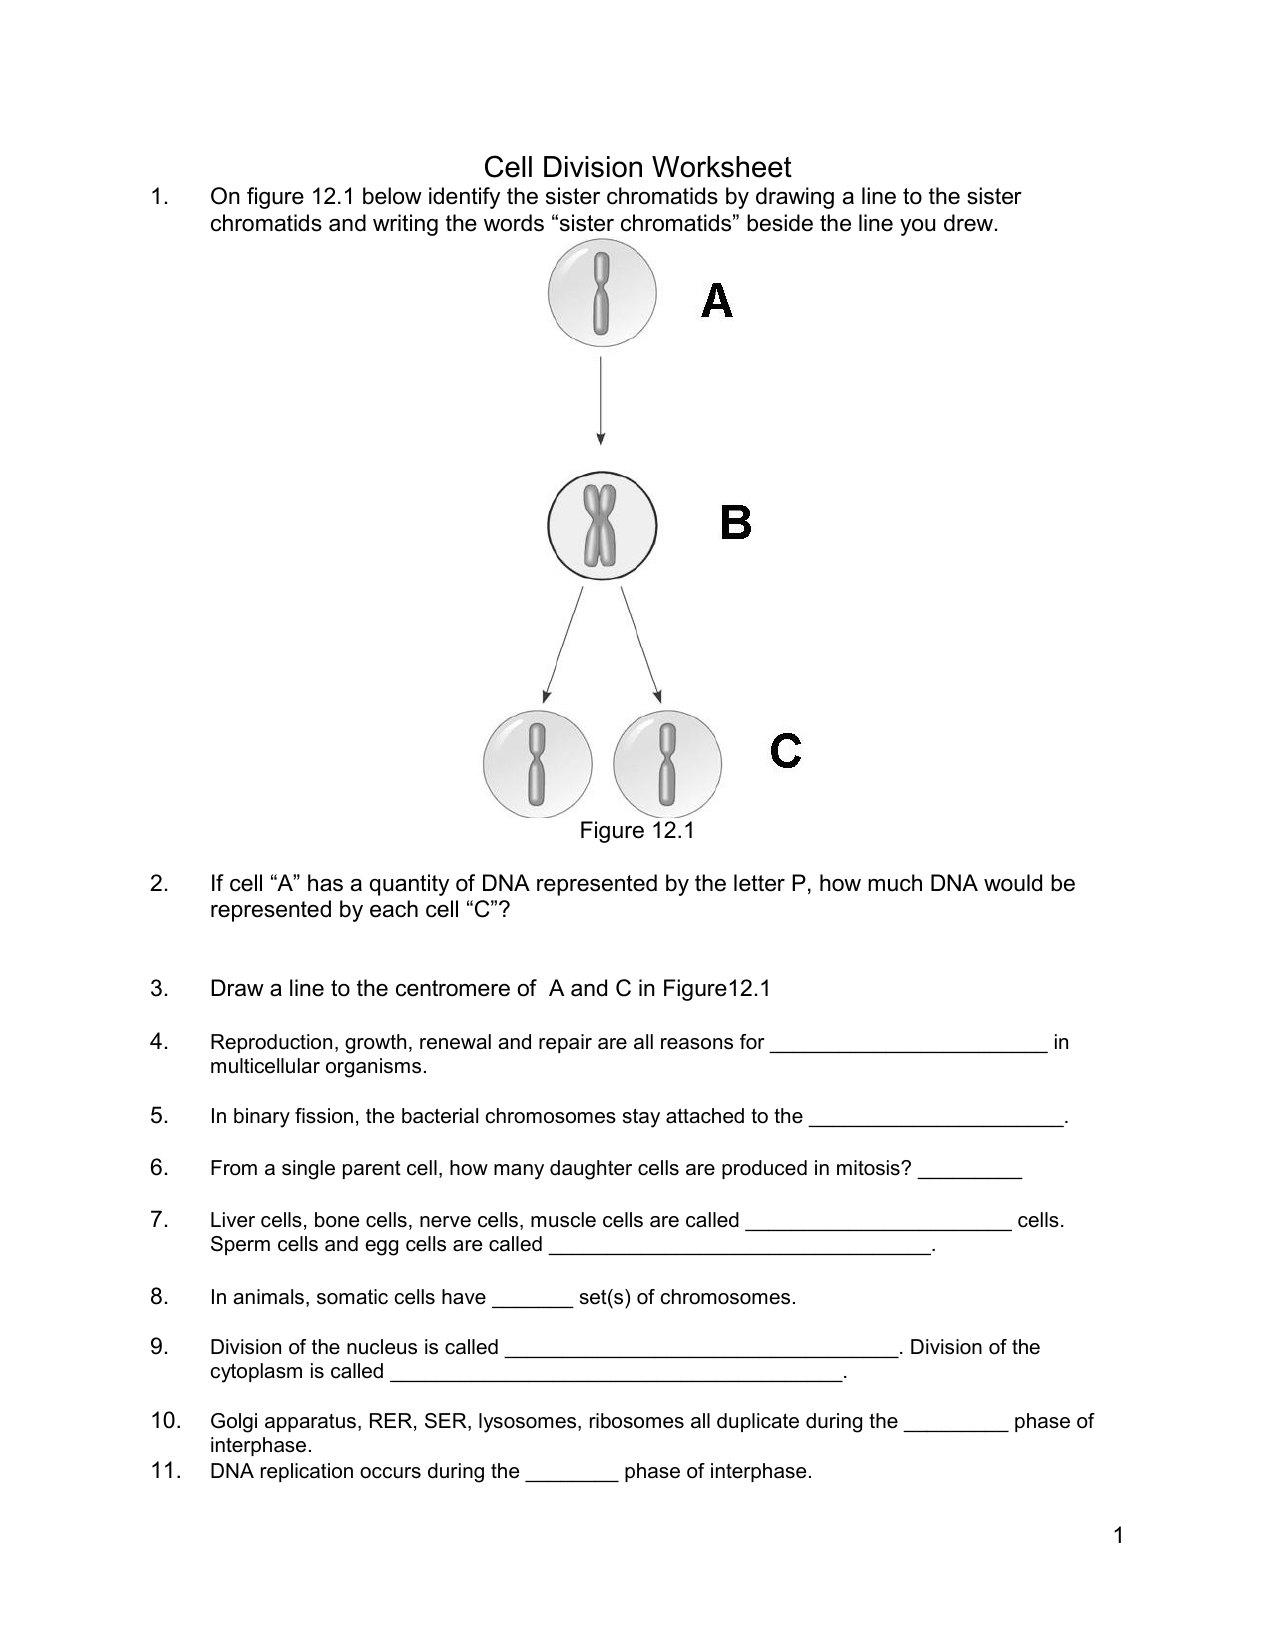 Cell Division Worksheet Answers